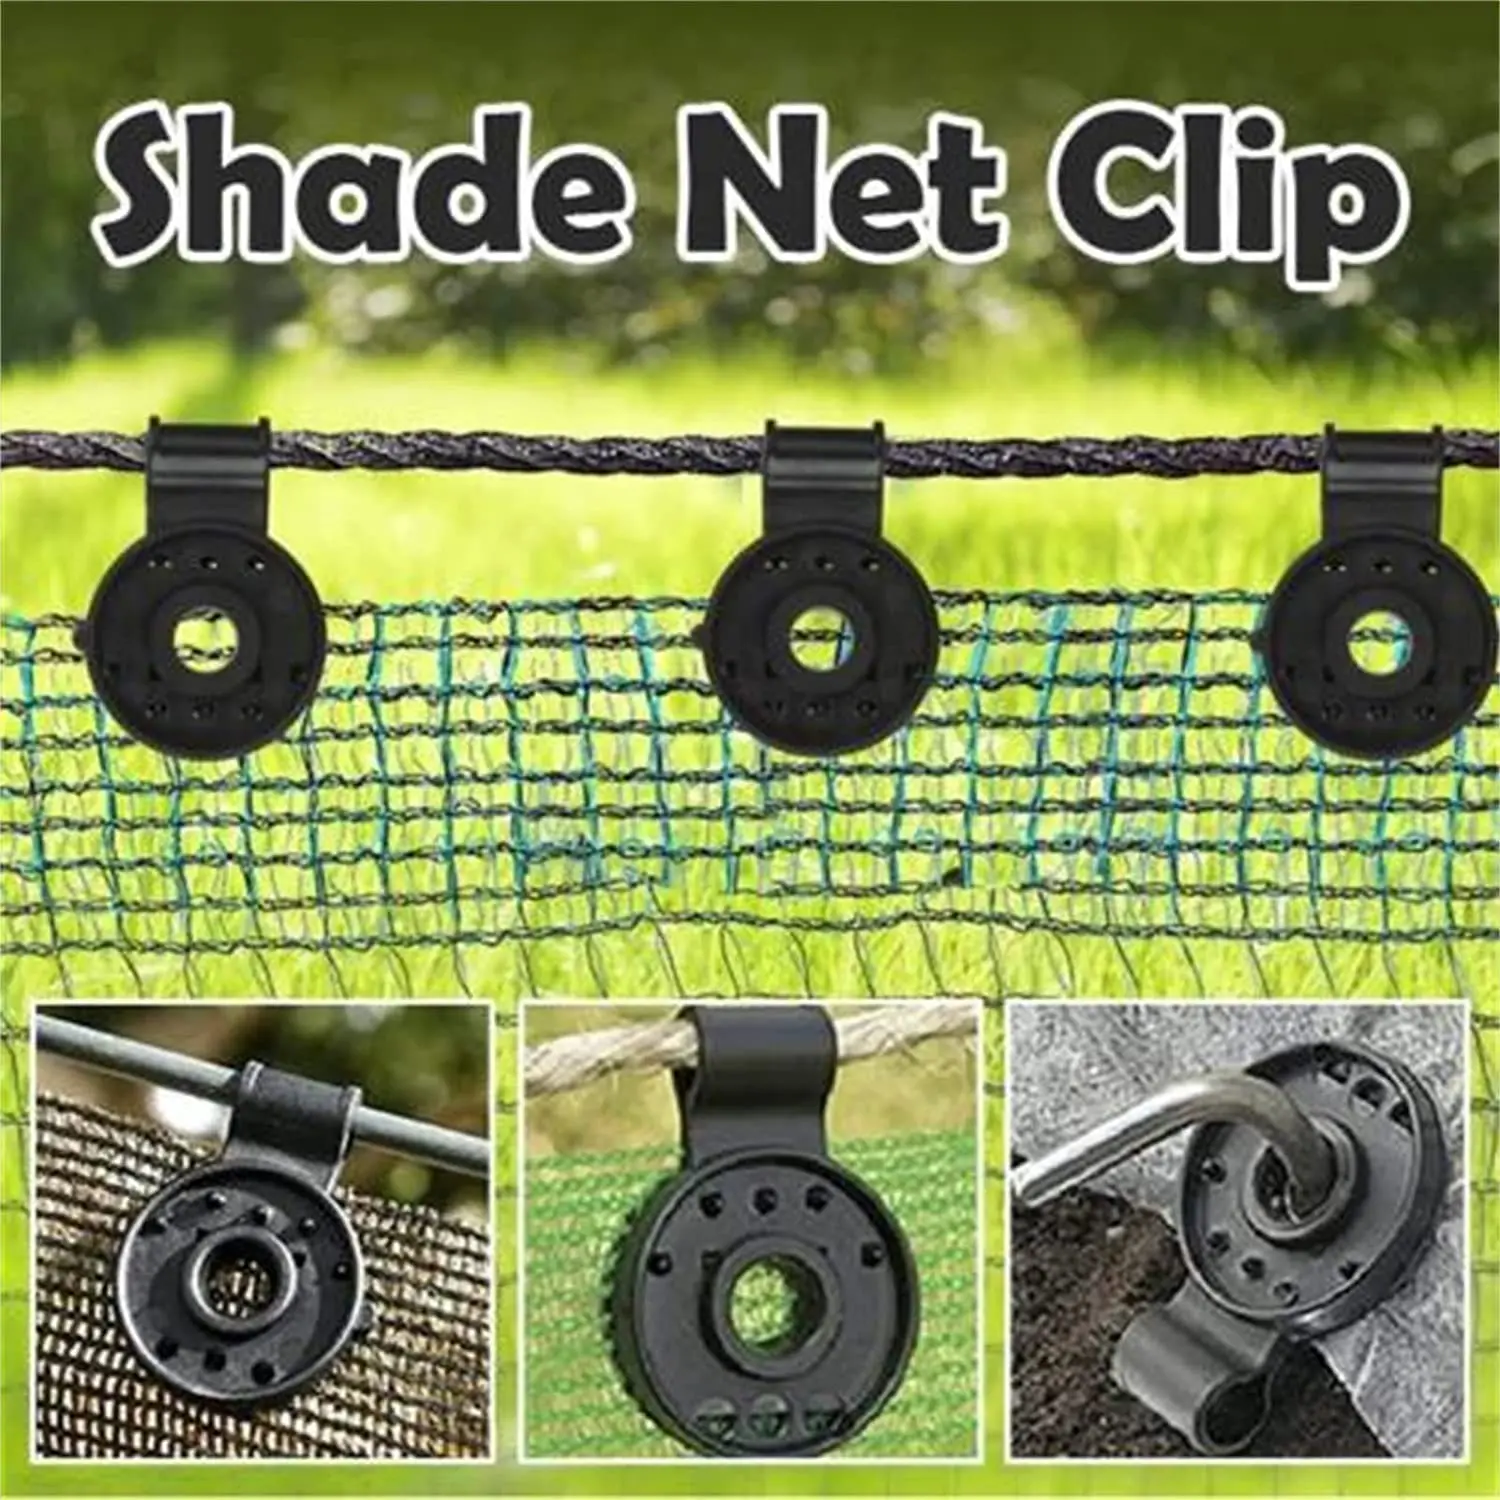 Shade Cloth Clips Shade Fabric Clamps Accessories Grommets For Net Mesh  Cover Sunblock Fabric In Garden Backyard Greenhouse - AliExpress